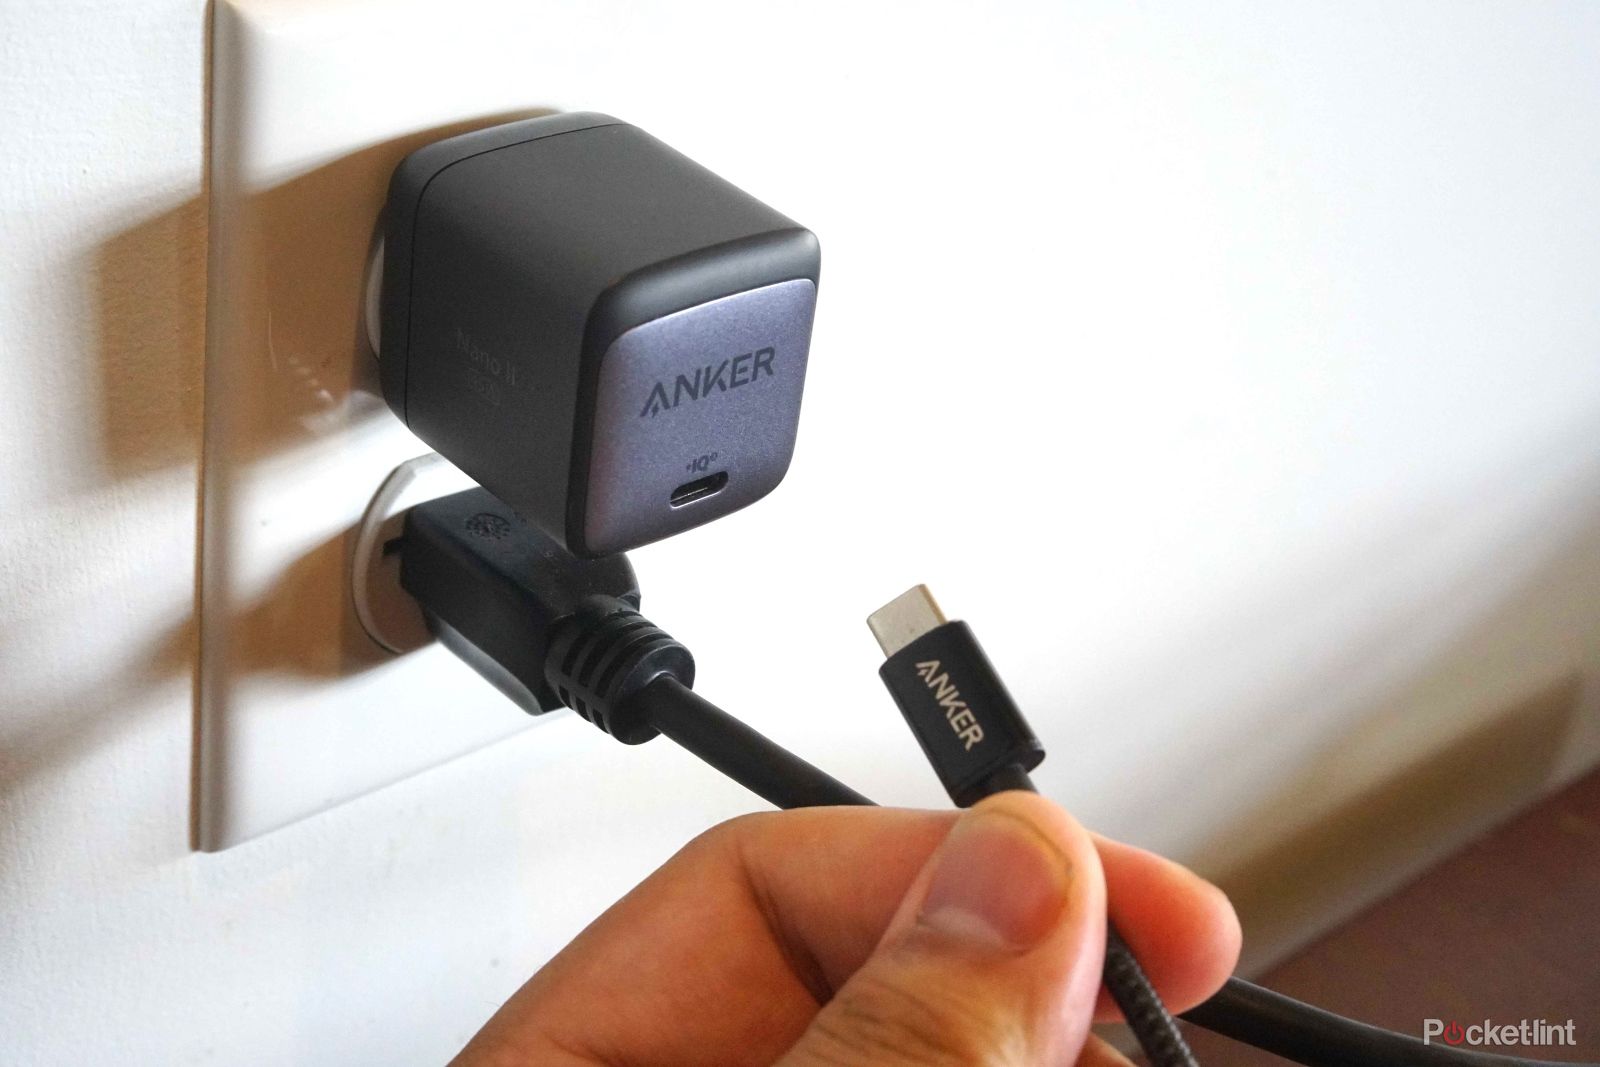 Anker Nano II 45W USB-C charger block plugged into wall with USC C charging wire held in hand next to it.